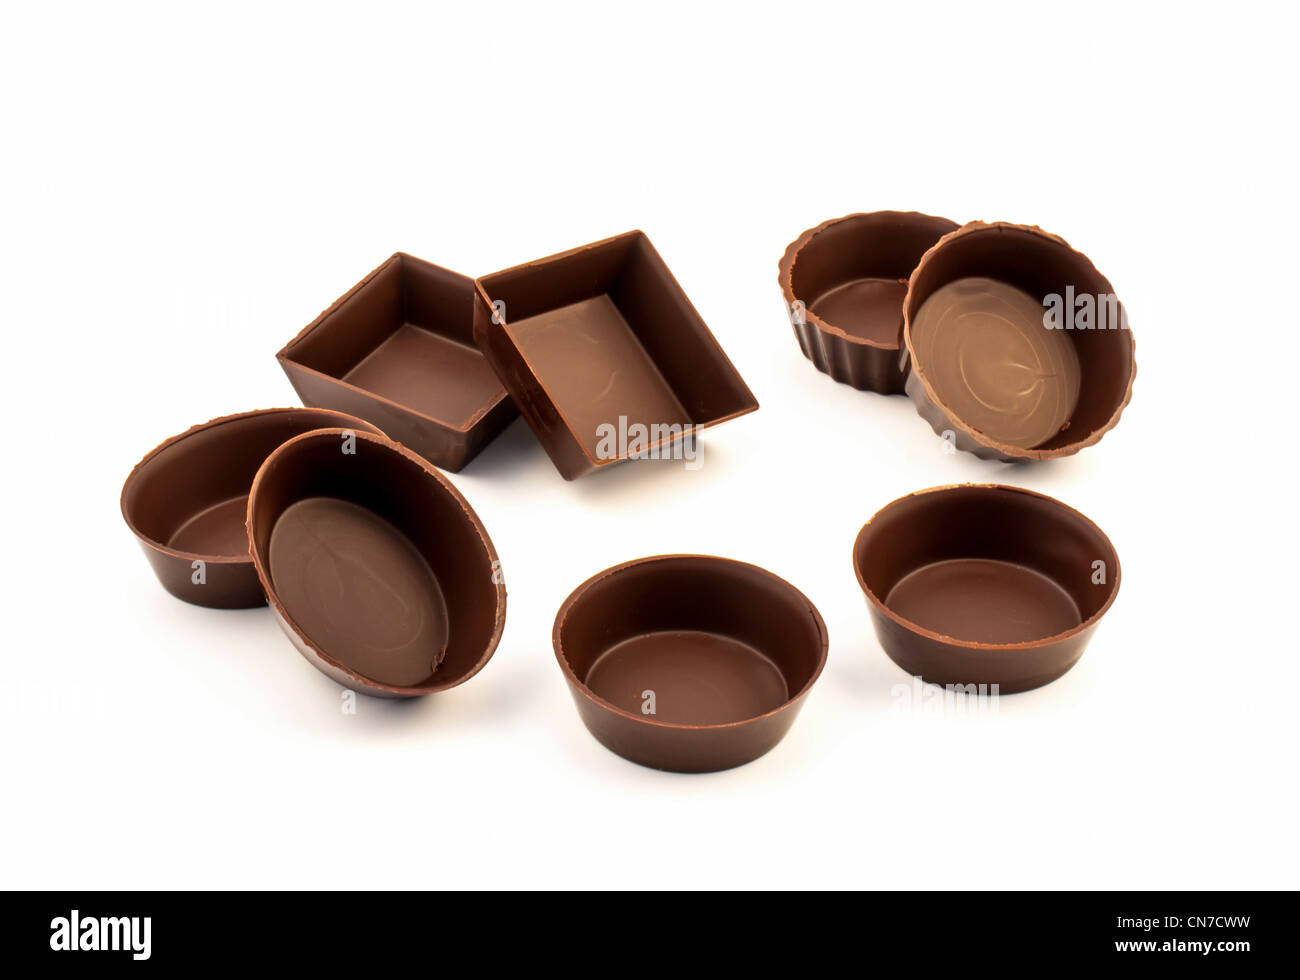 Chocolate edible molds pastry, isolated on white background Stock Photo